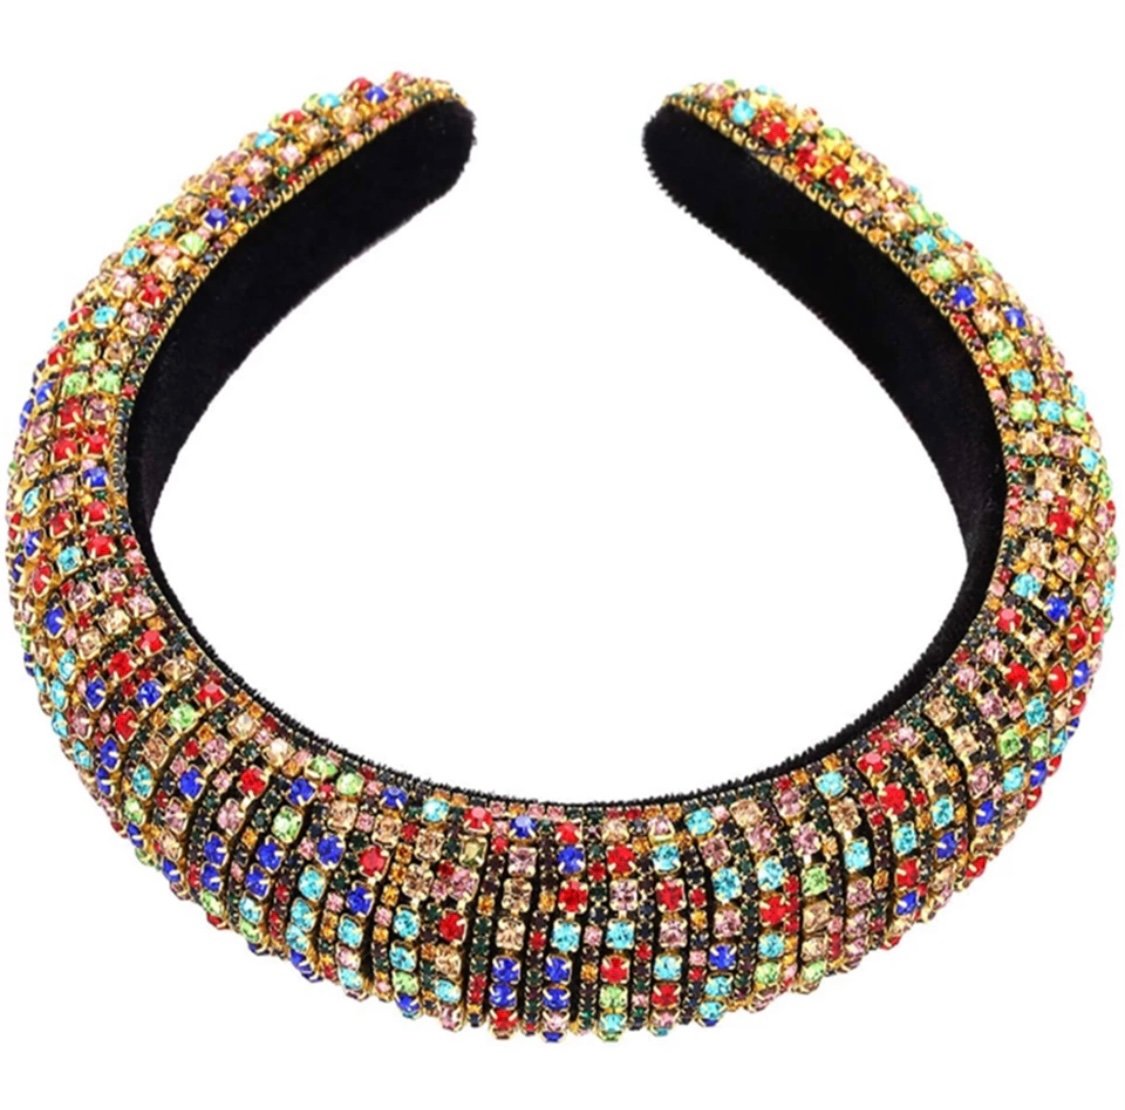 Sisie's Beauty Boutique Colorful Jeweled Headband